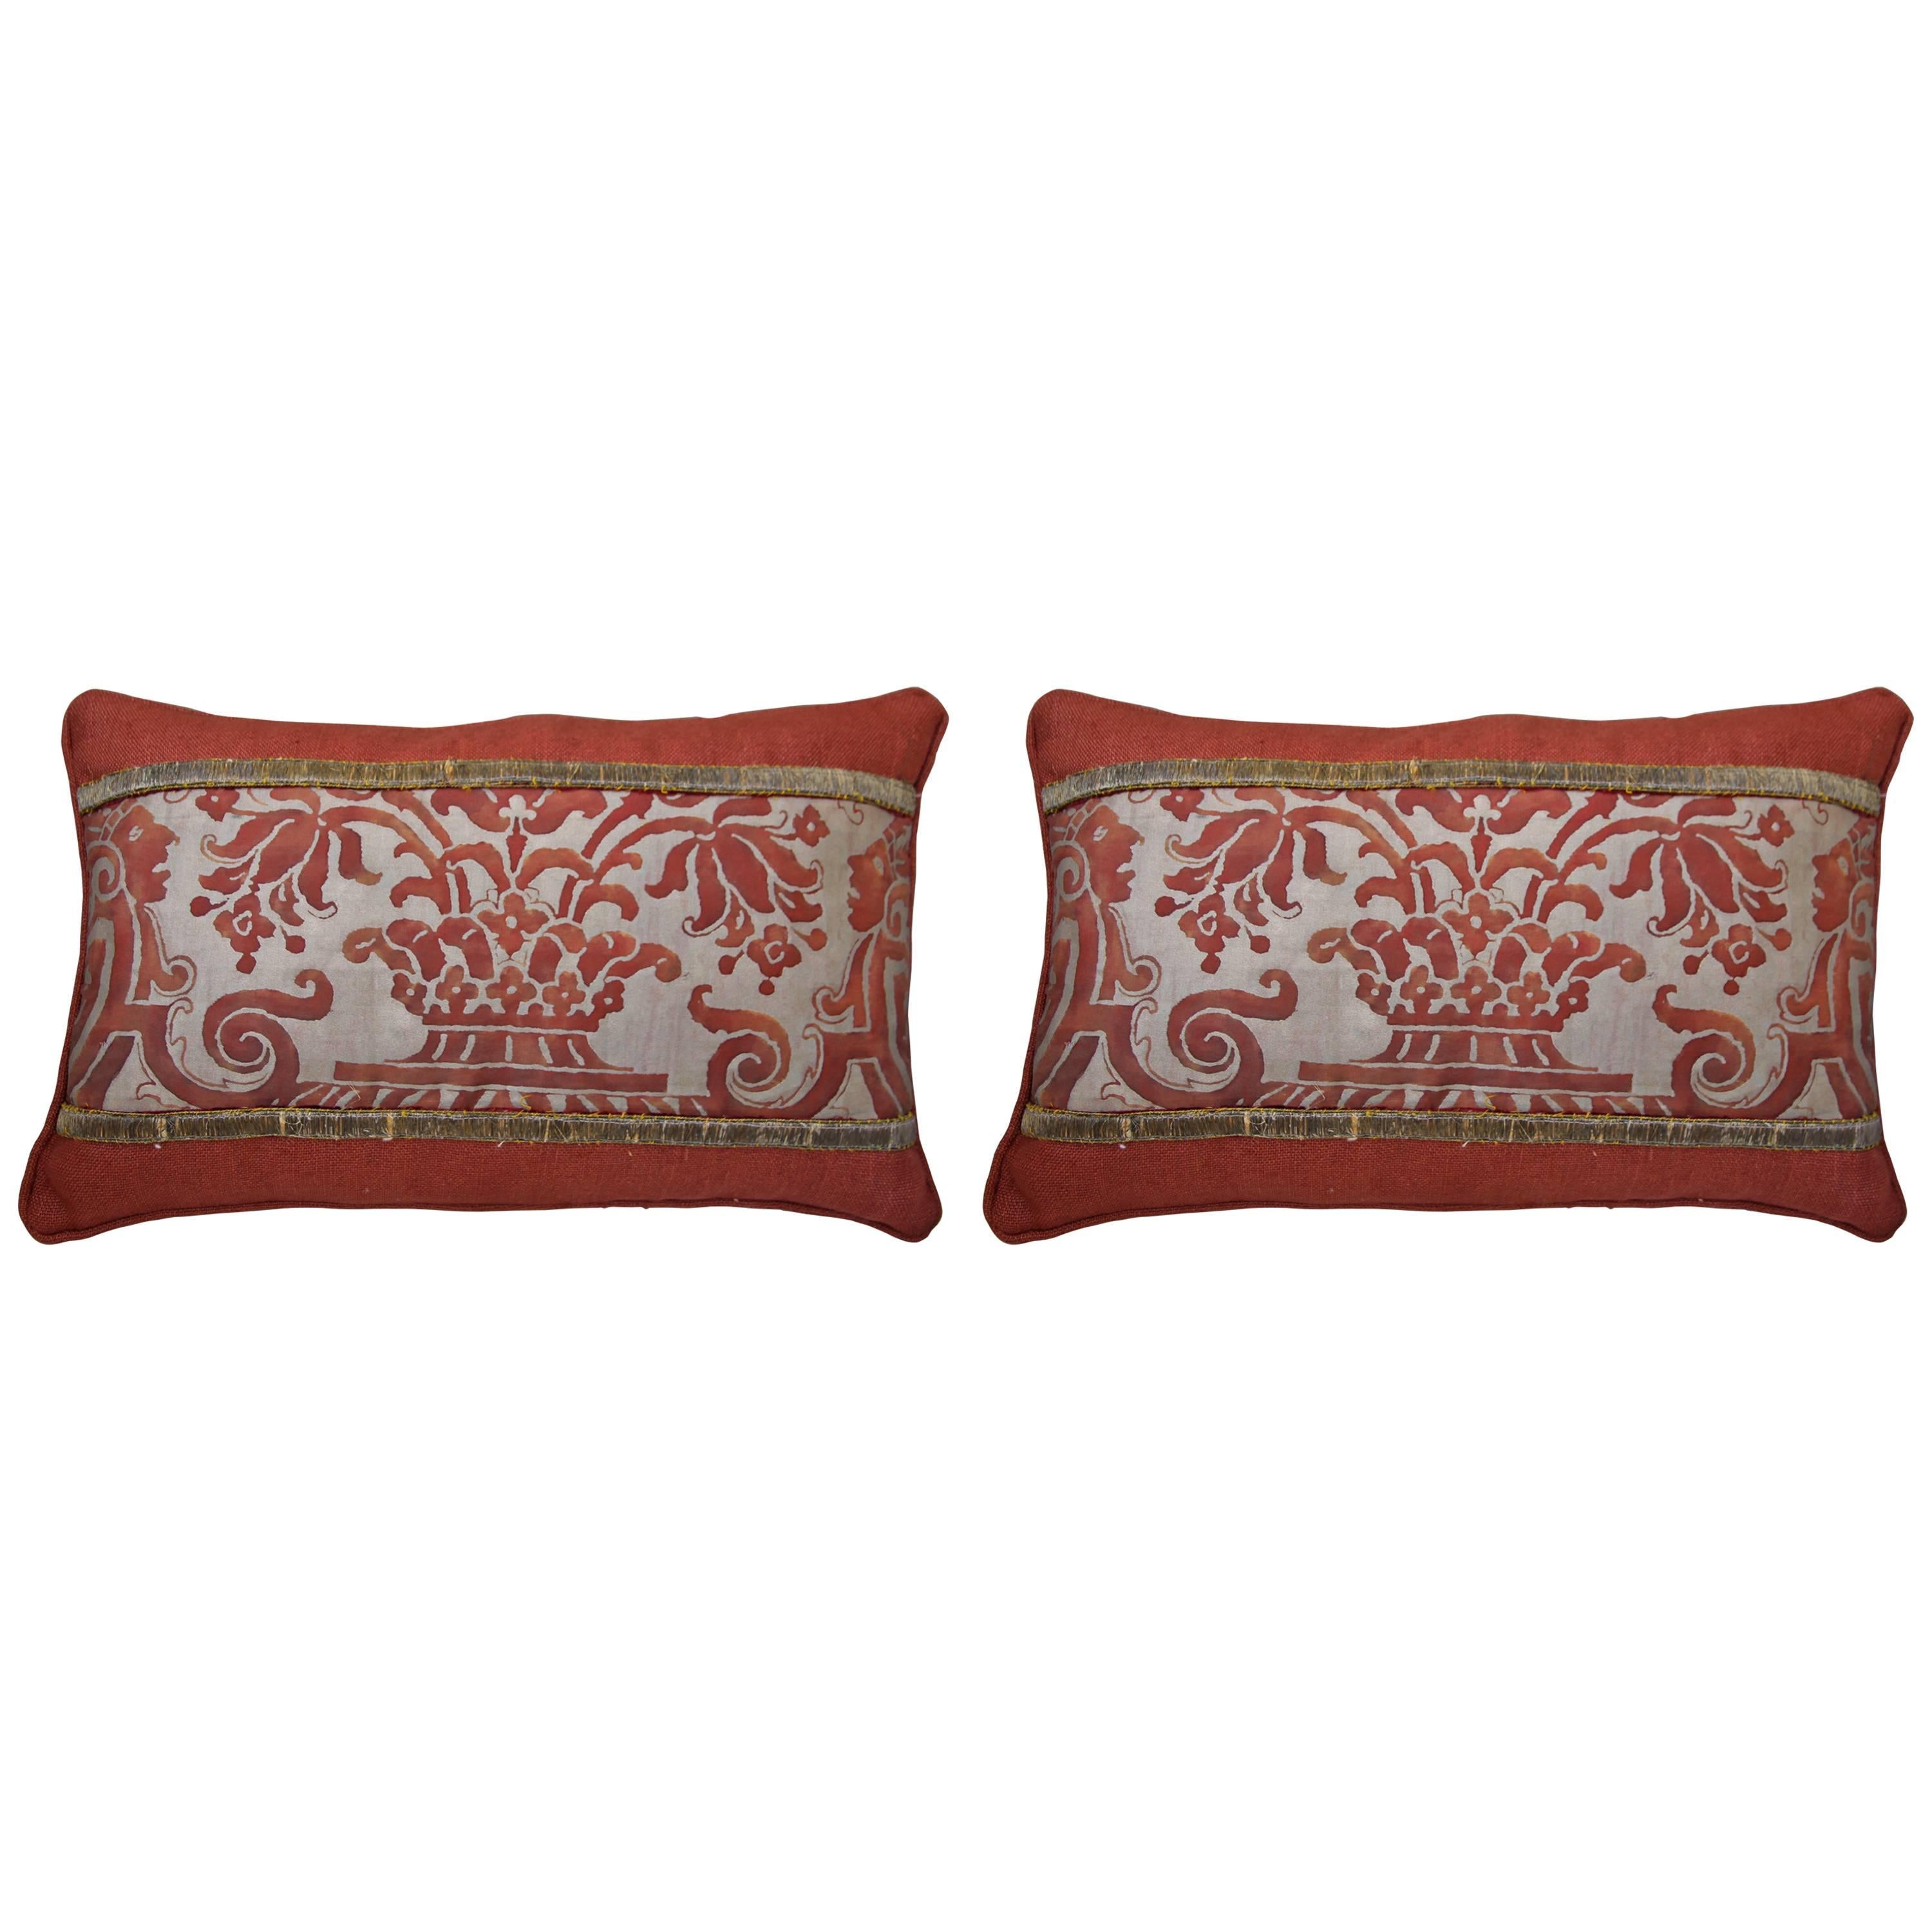 Pair of Rust and Metallic Gold Fortuny Pillows